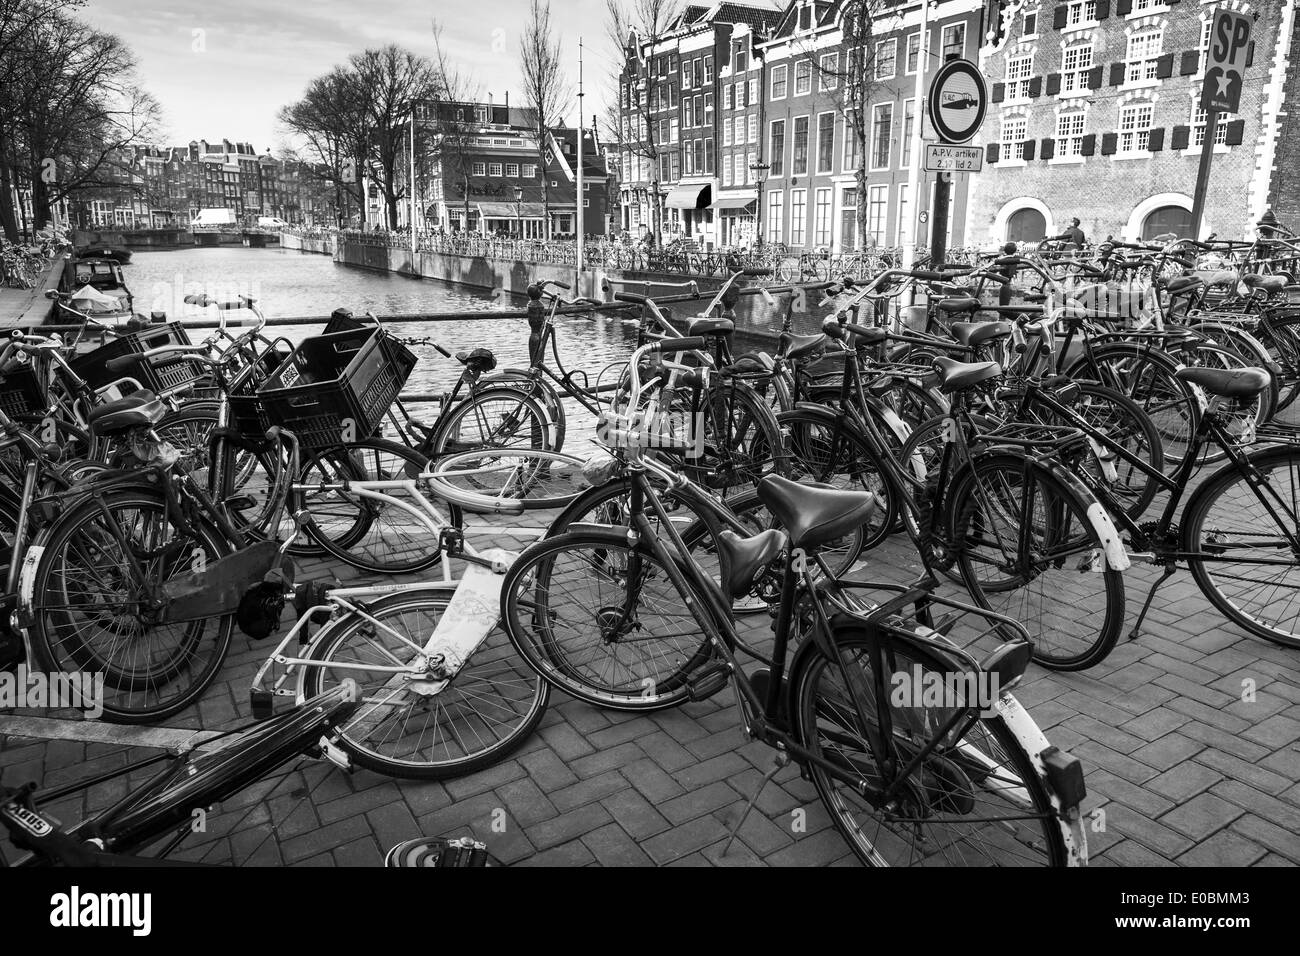 AMSTERDAM, NETHERLANDS - MARCH 19, 2014: Large group of bicycles stand on a parking place Stock Photo